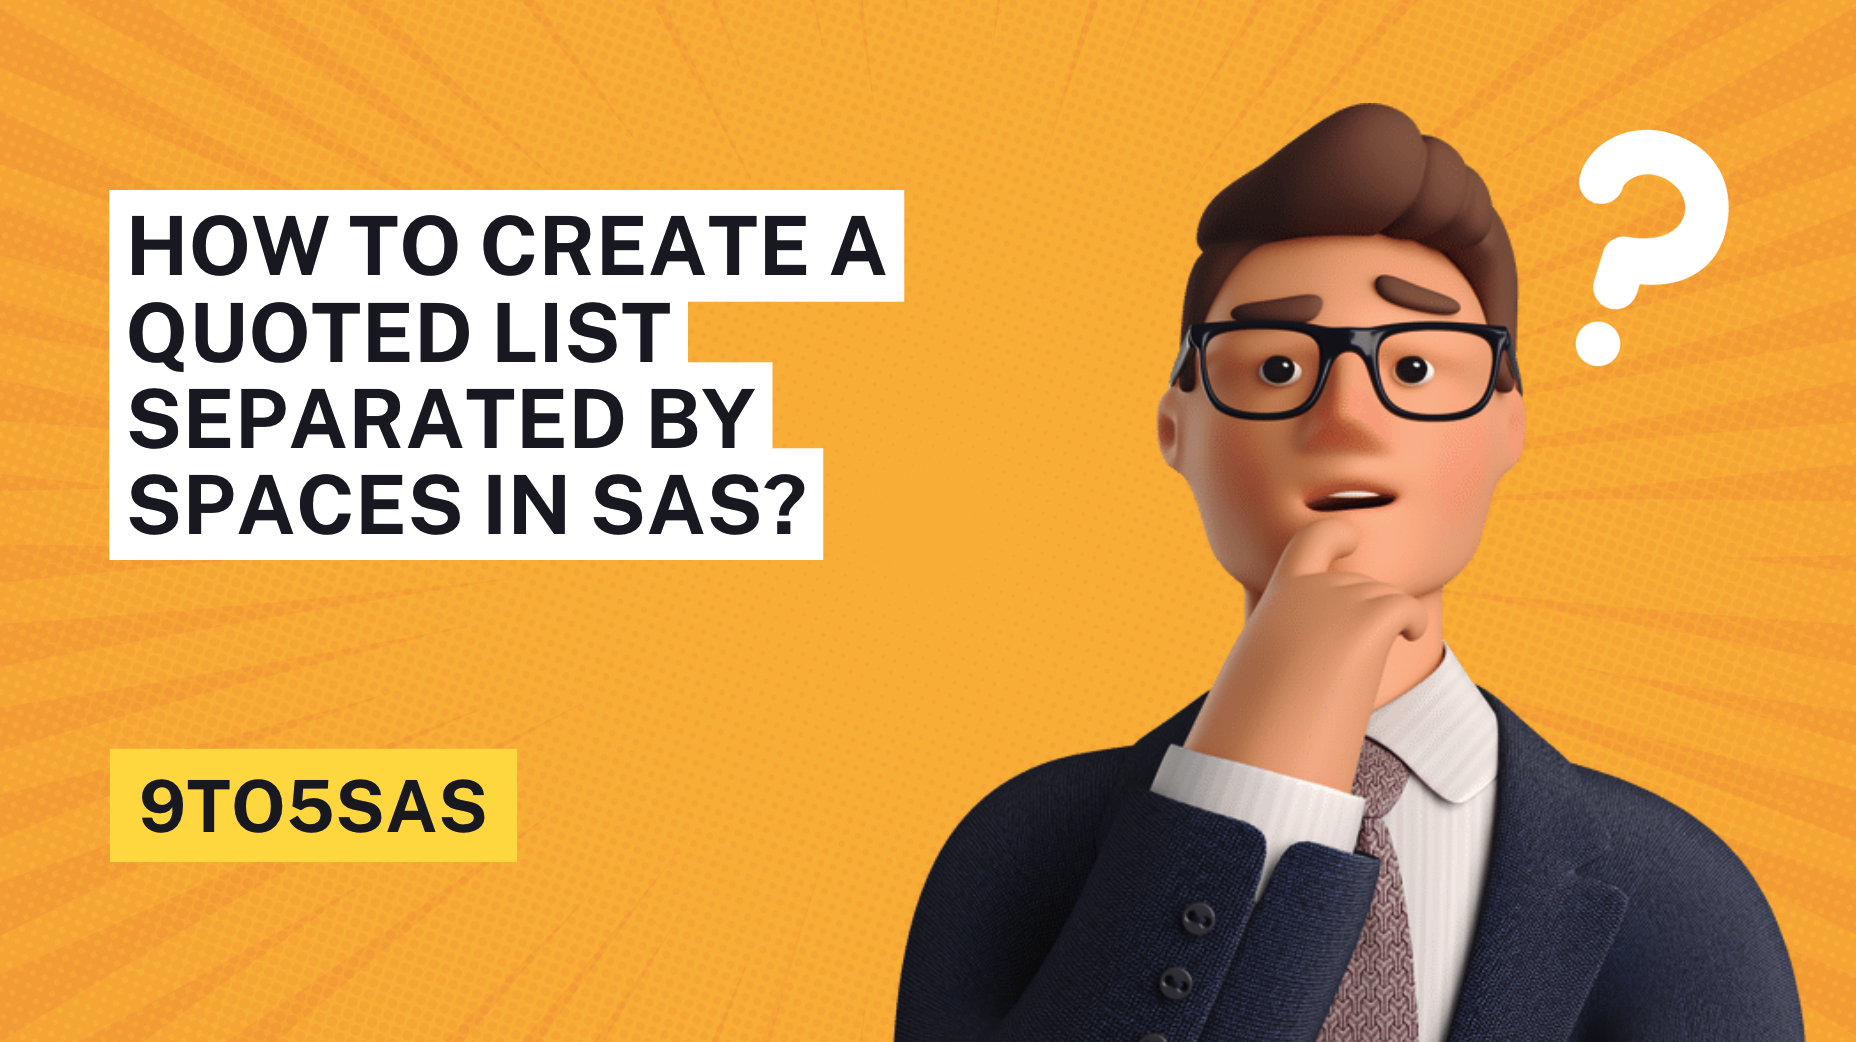 How to Create a Quoted List Separated by Spaces in SAS